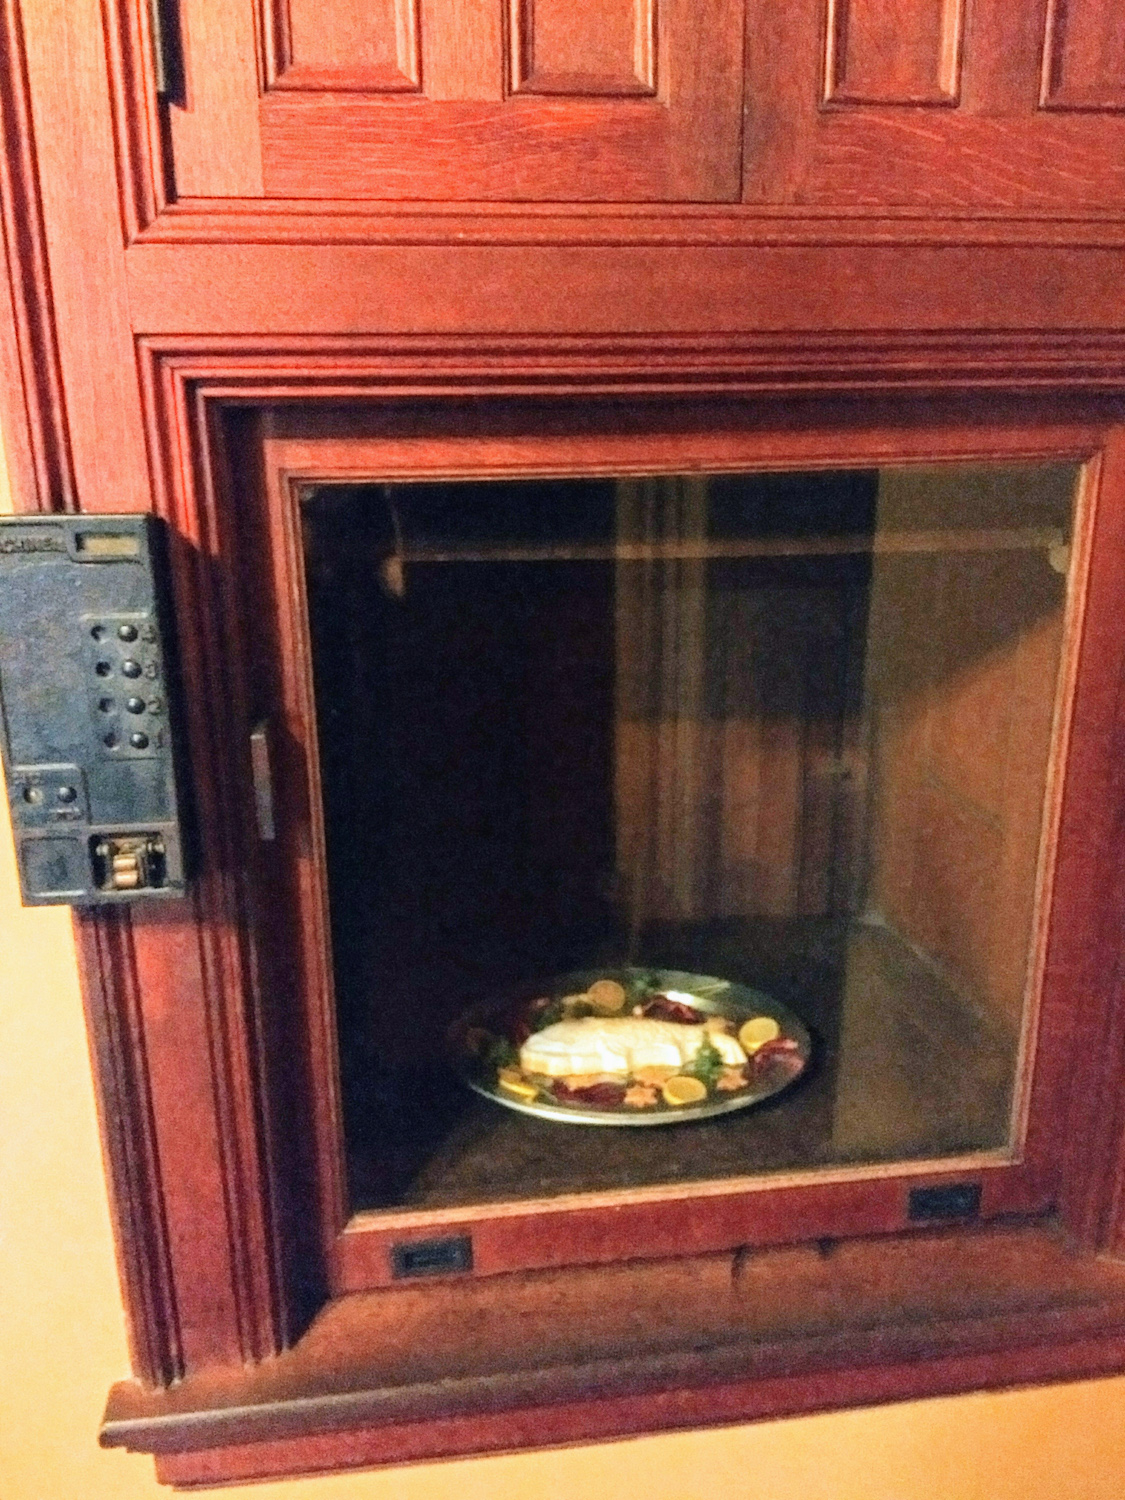 Electric dumbwaiter in kitchen pantry